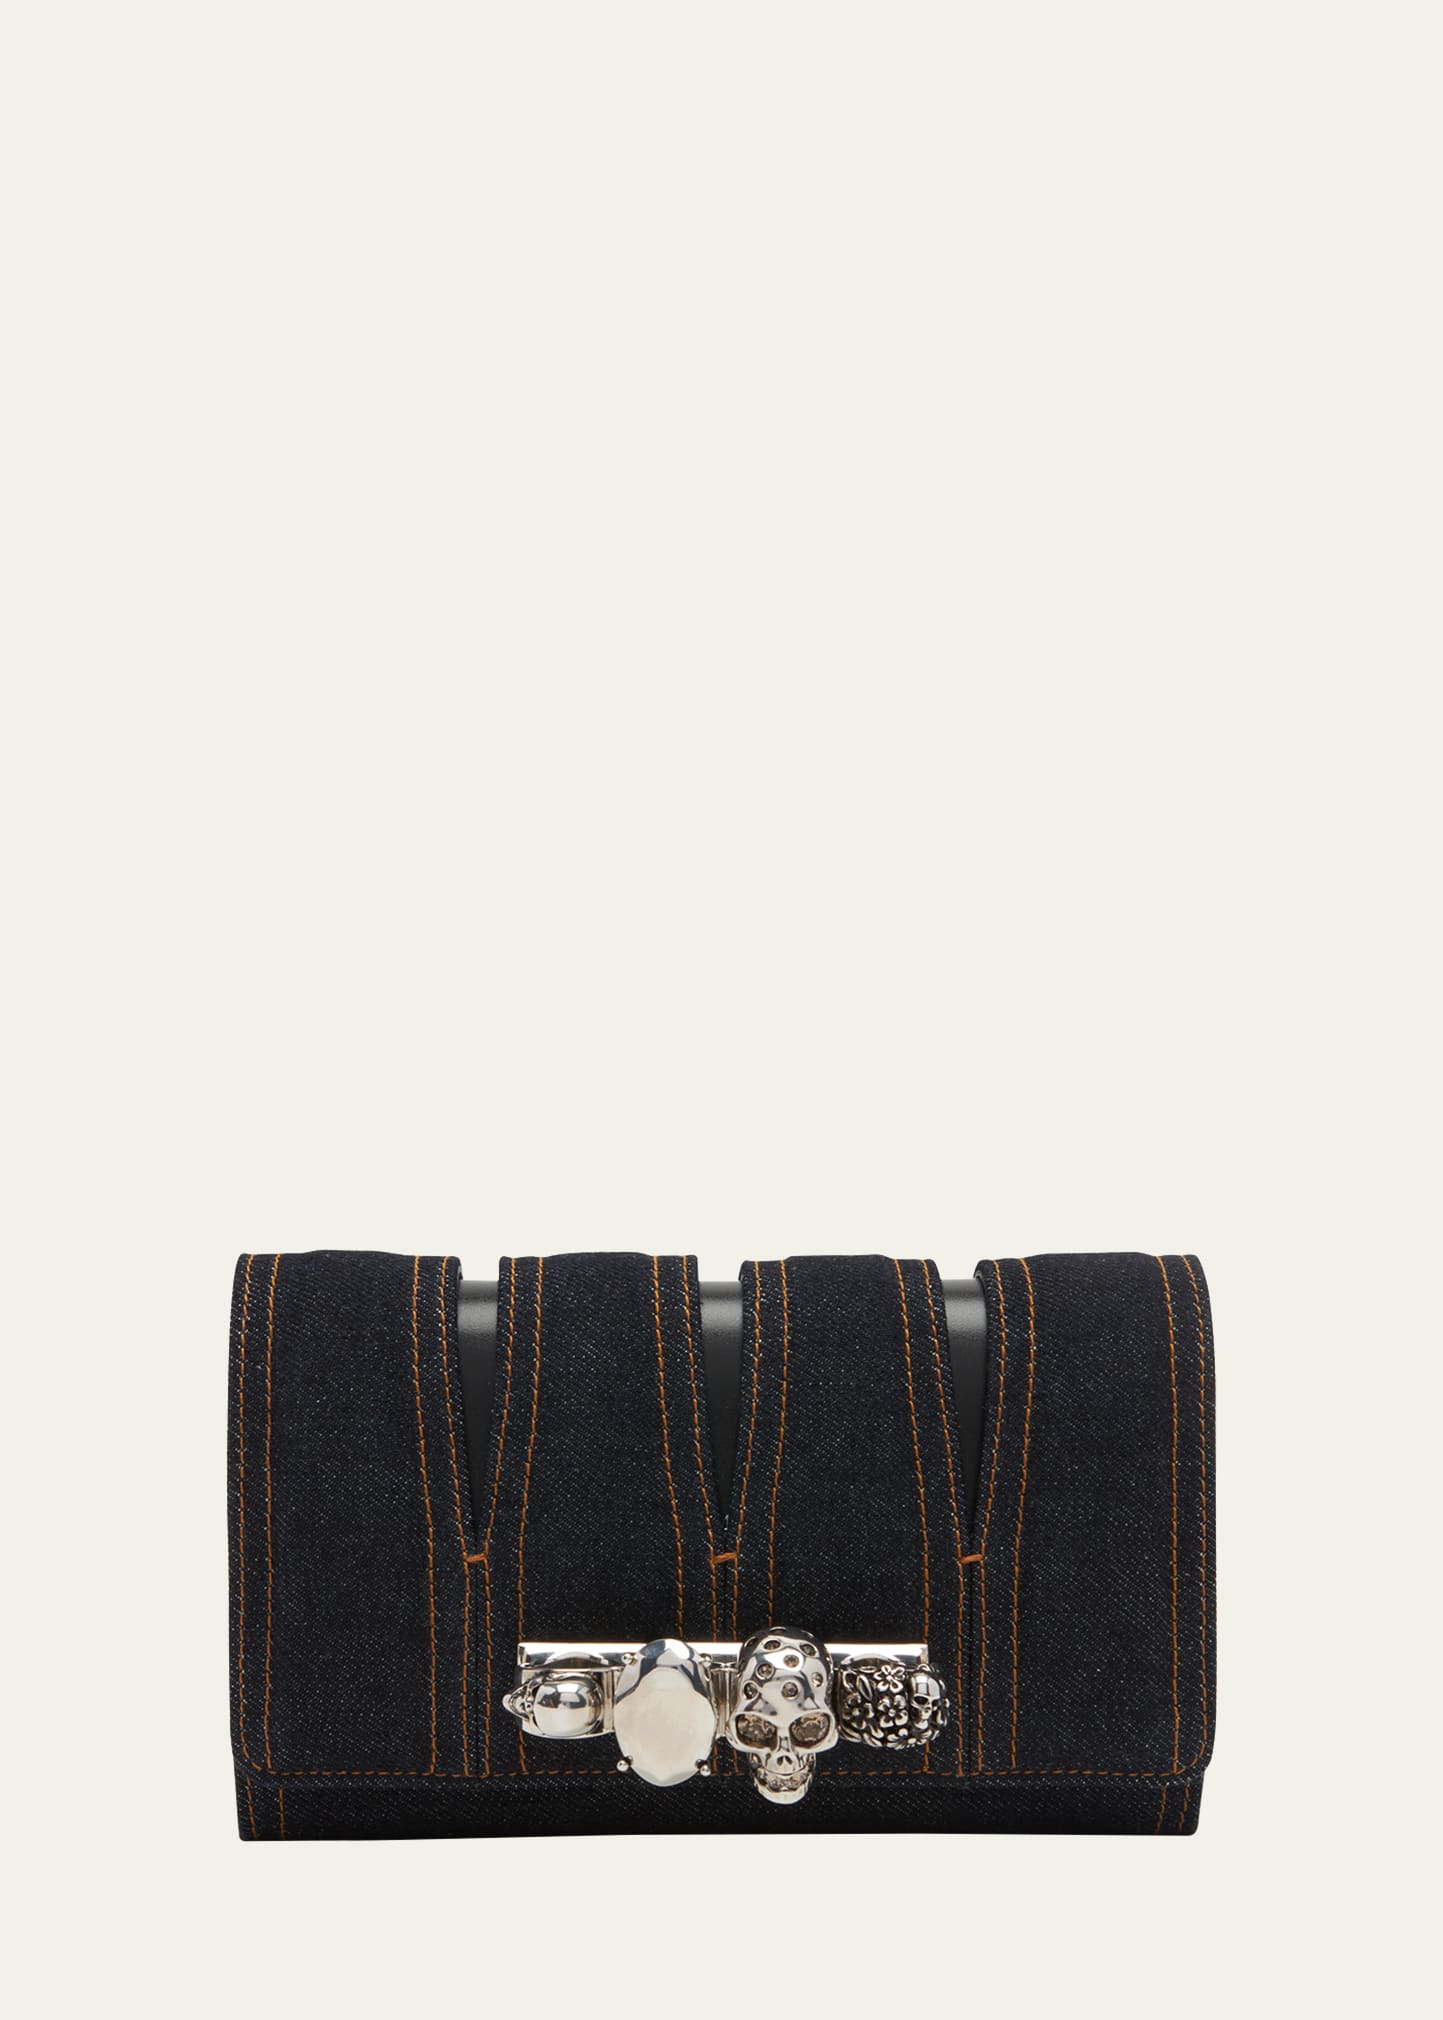 Spider Jewelled Four Ring Box Clutch' bag by Alexander McQueen